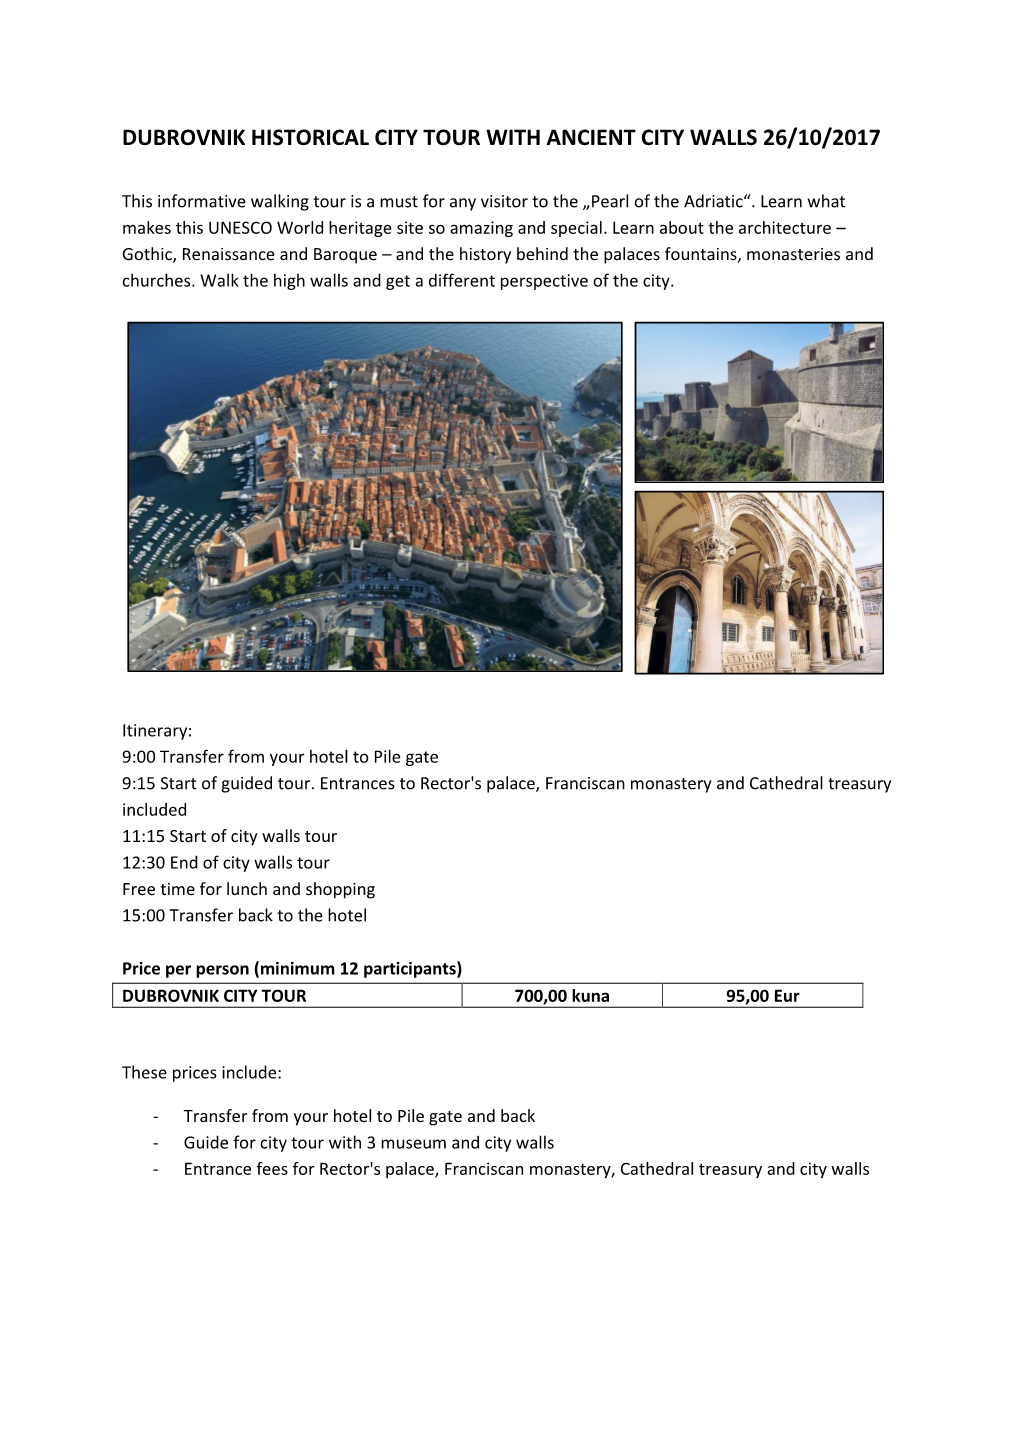 Dubrovnik Historical City Tour with Ancient City Walls 26/10/2017